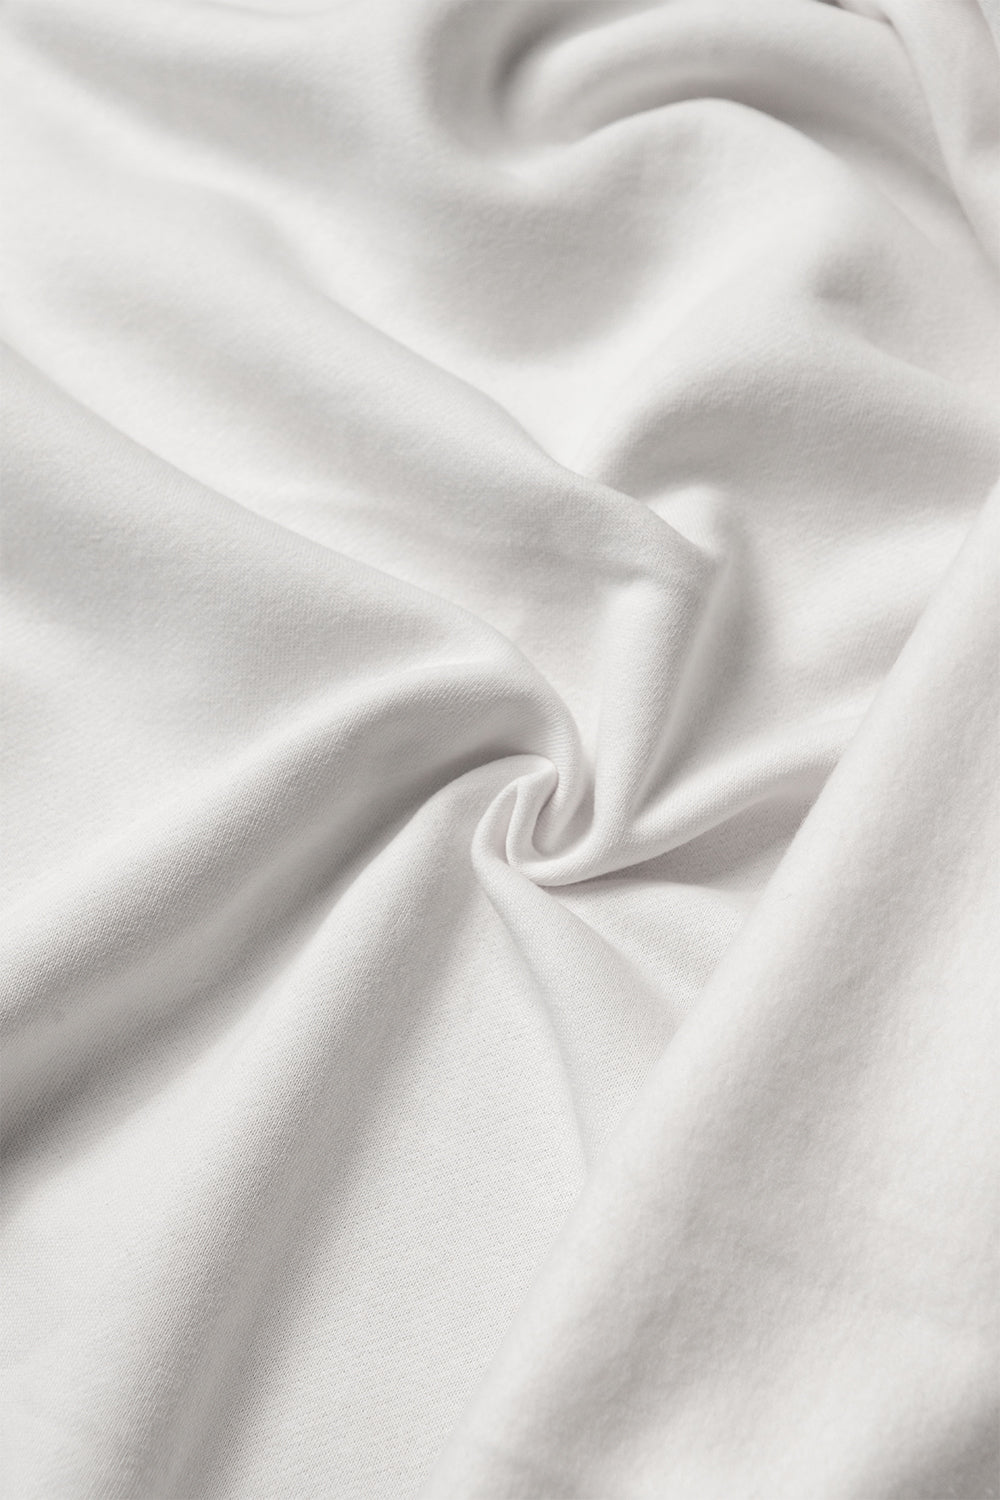 Premium brushed fleece in snow white color - indulge in comfort while you elevate your sewing projects with this versatile fabric